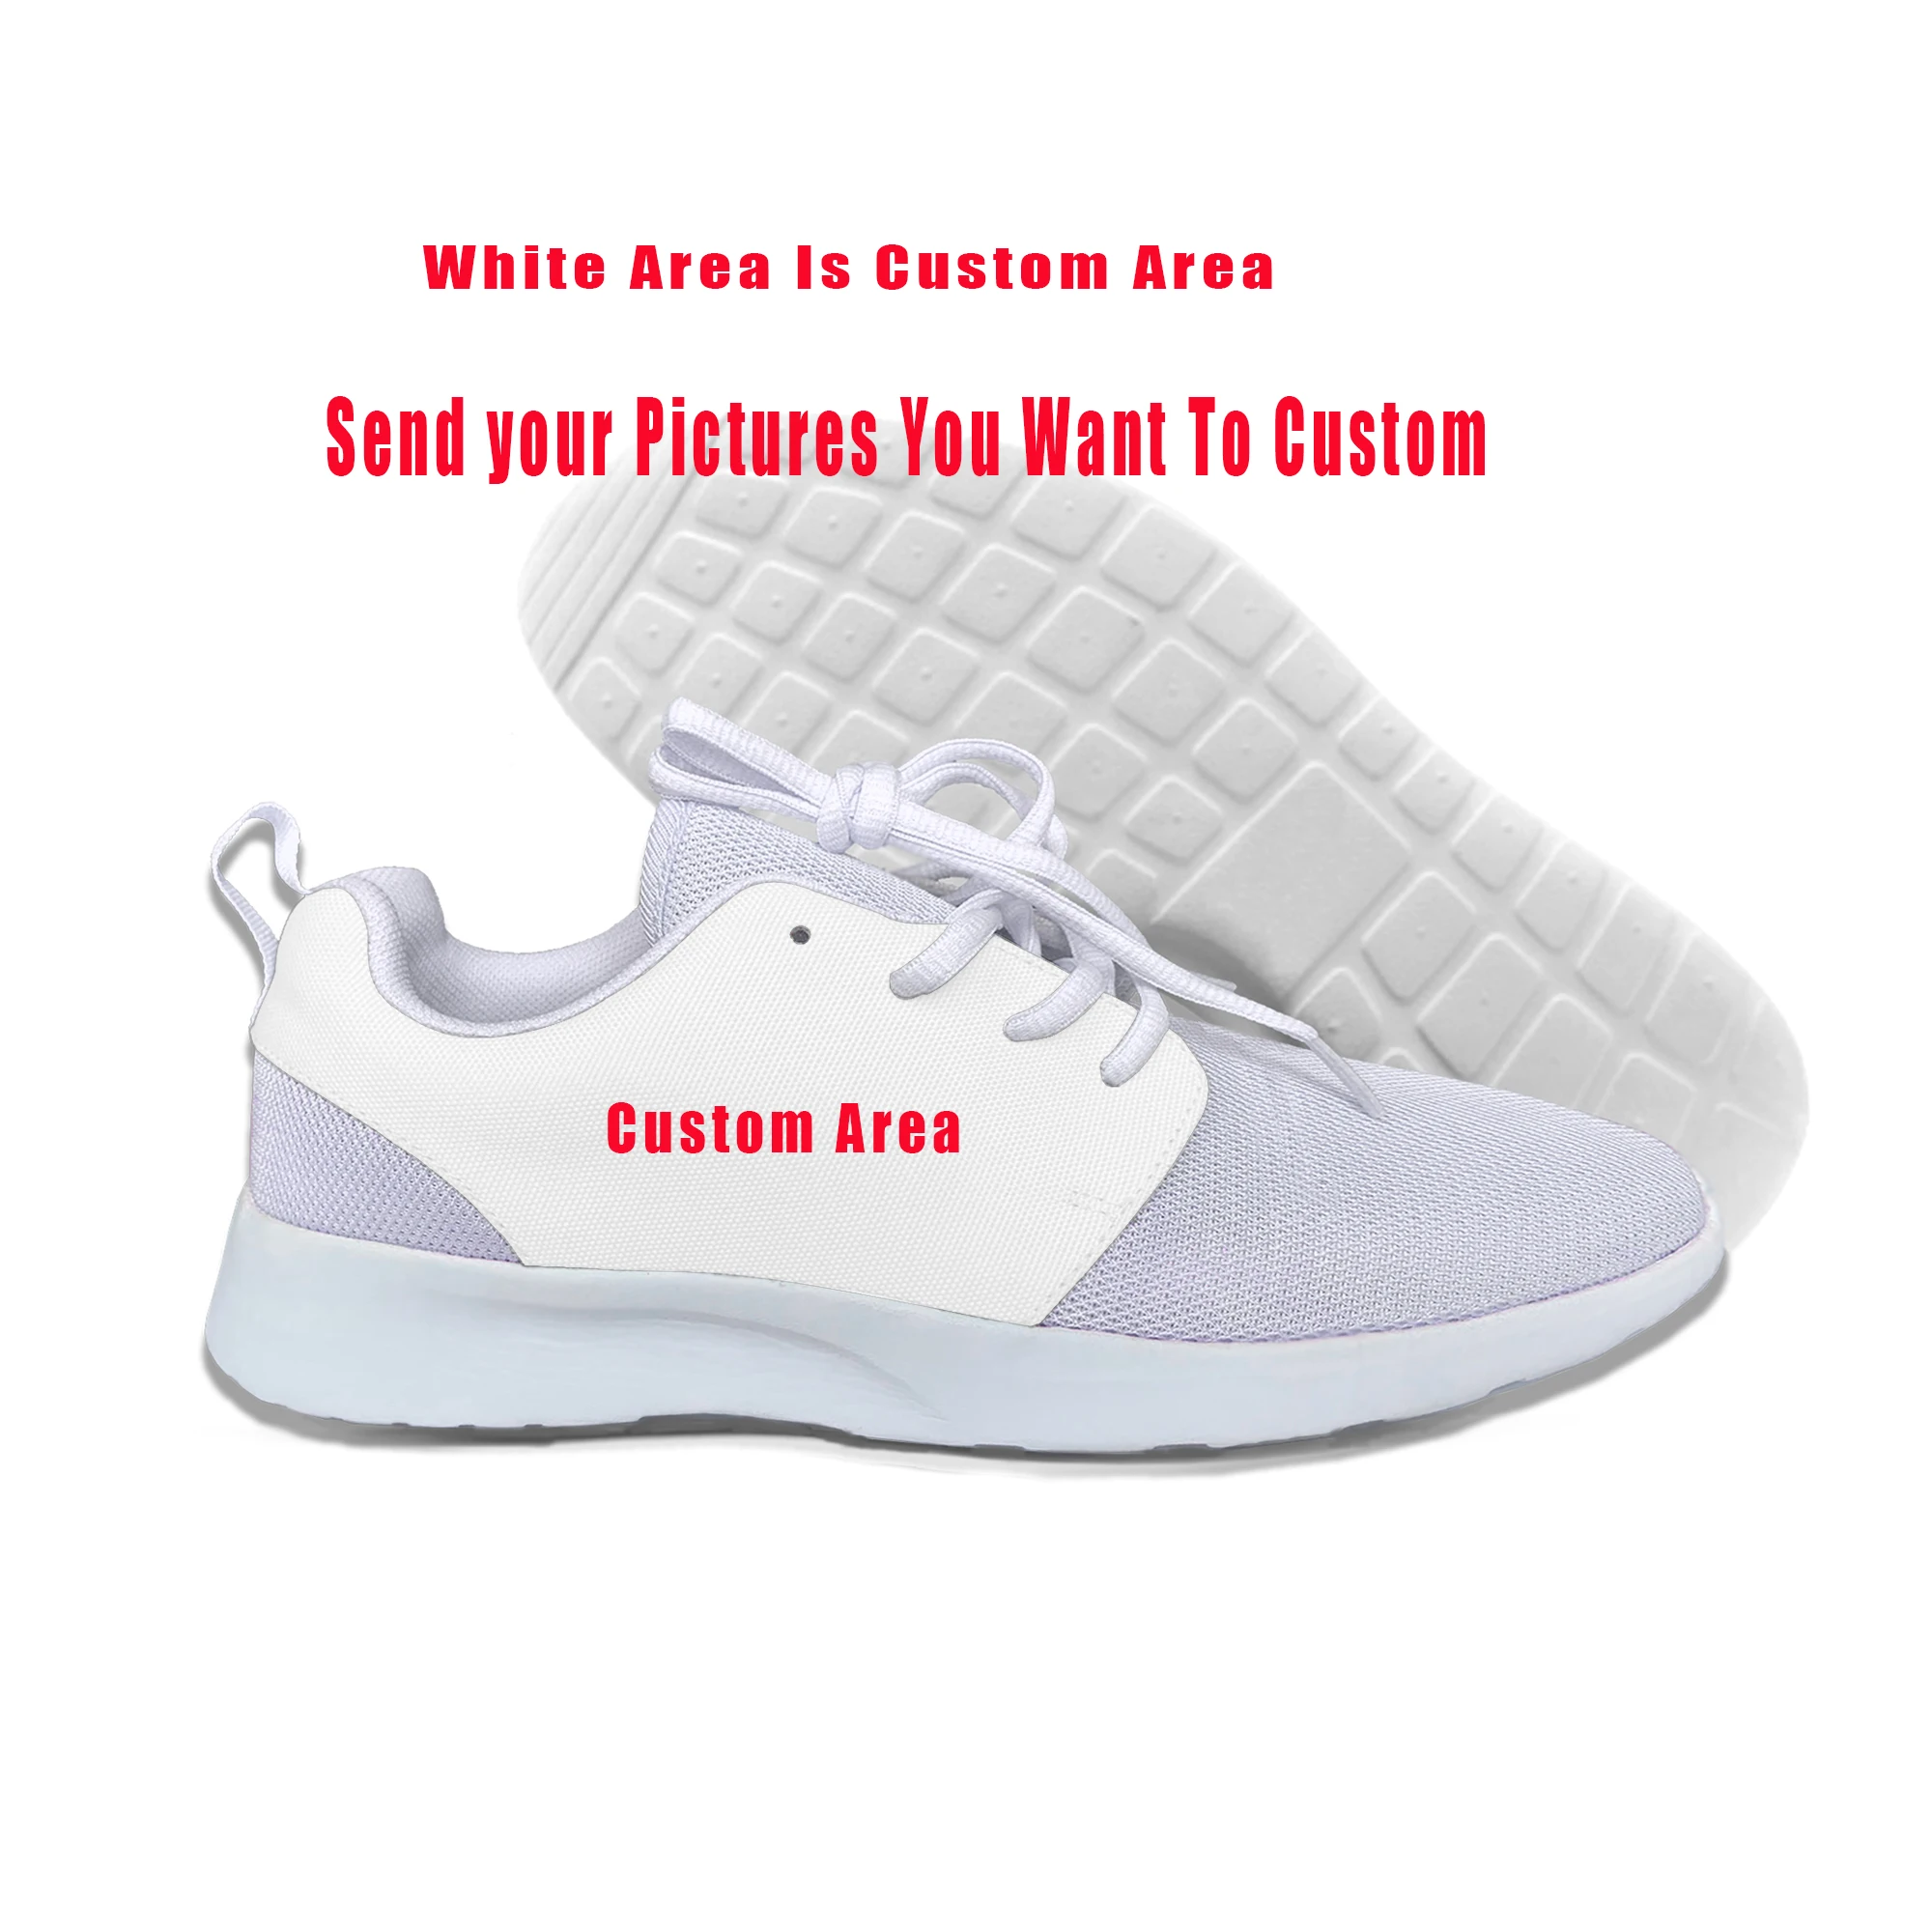 Hot Summer New Men Women Fashion Sweatshirt Miley Cyrus Shoes Lightweight Leisure Running Shoes Breathable Sports Shoes Sneakers images - 6